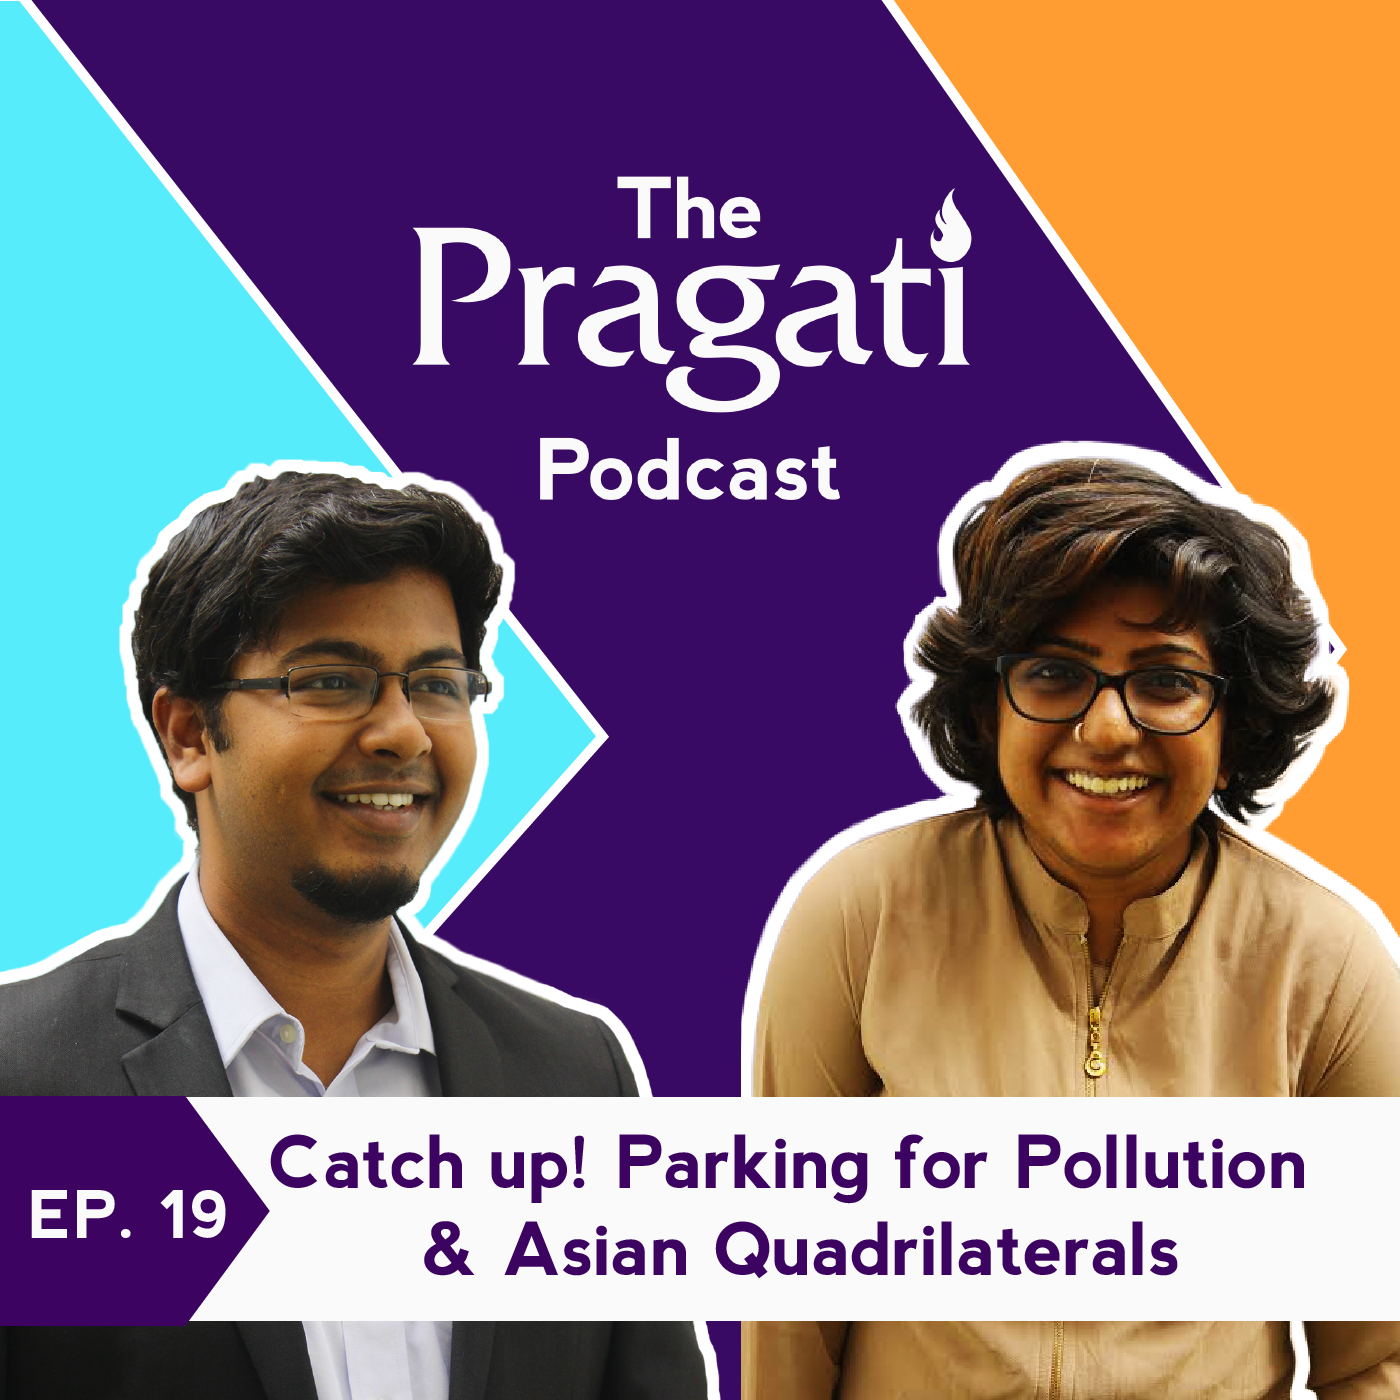 Ep. 19: Catch up! Parking for Pollution & Asian Quadrilaterals